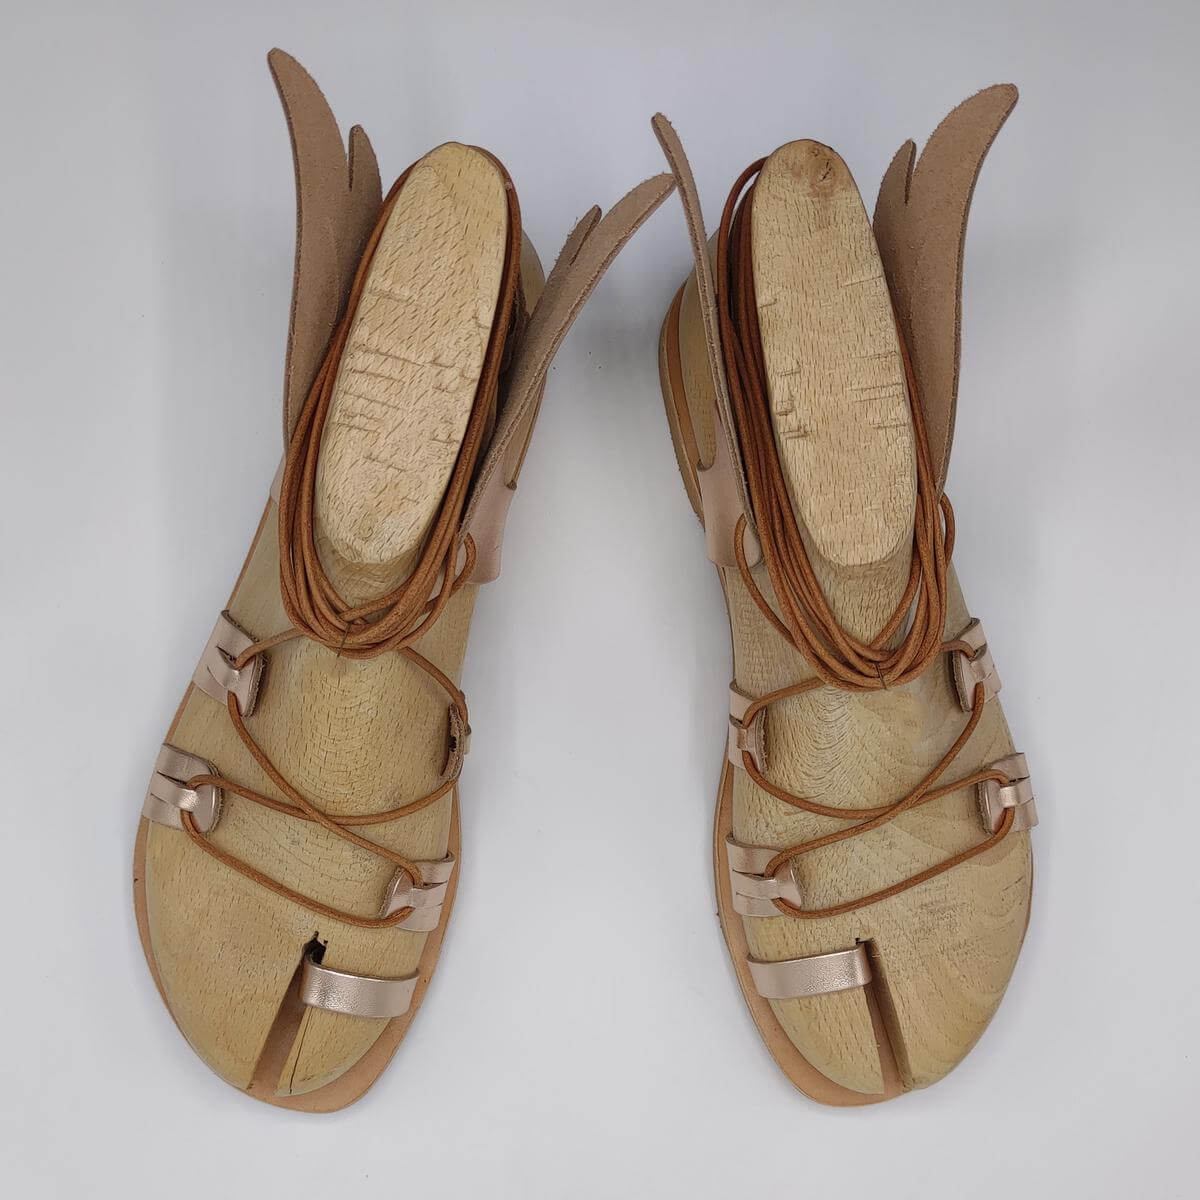 ancient greek sandals with wings rose gold